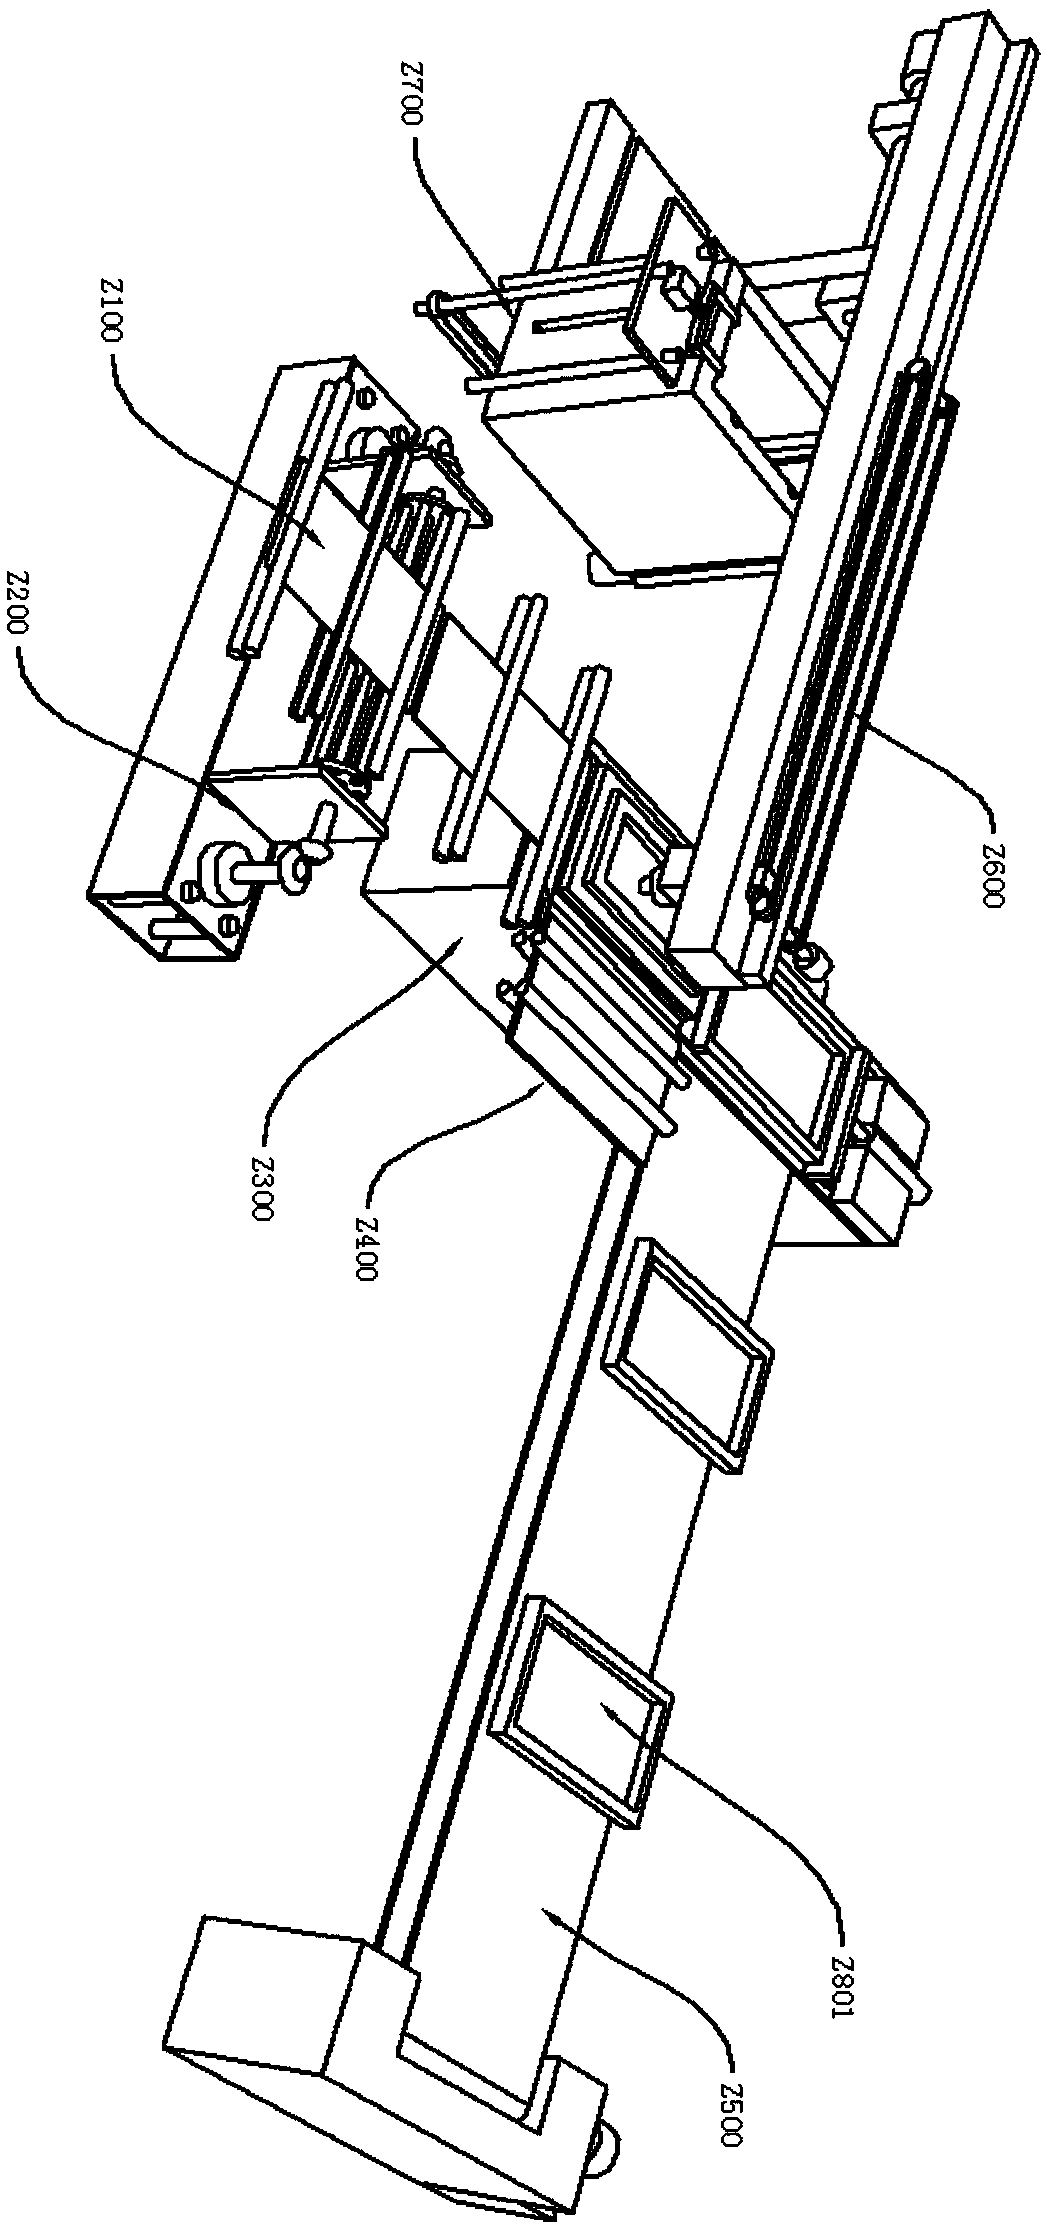 A paper handling mechanism for self-service bank counters